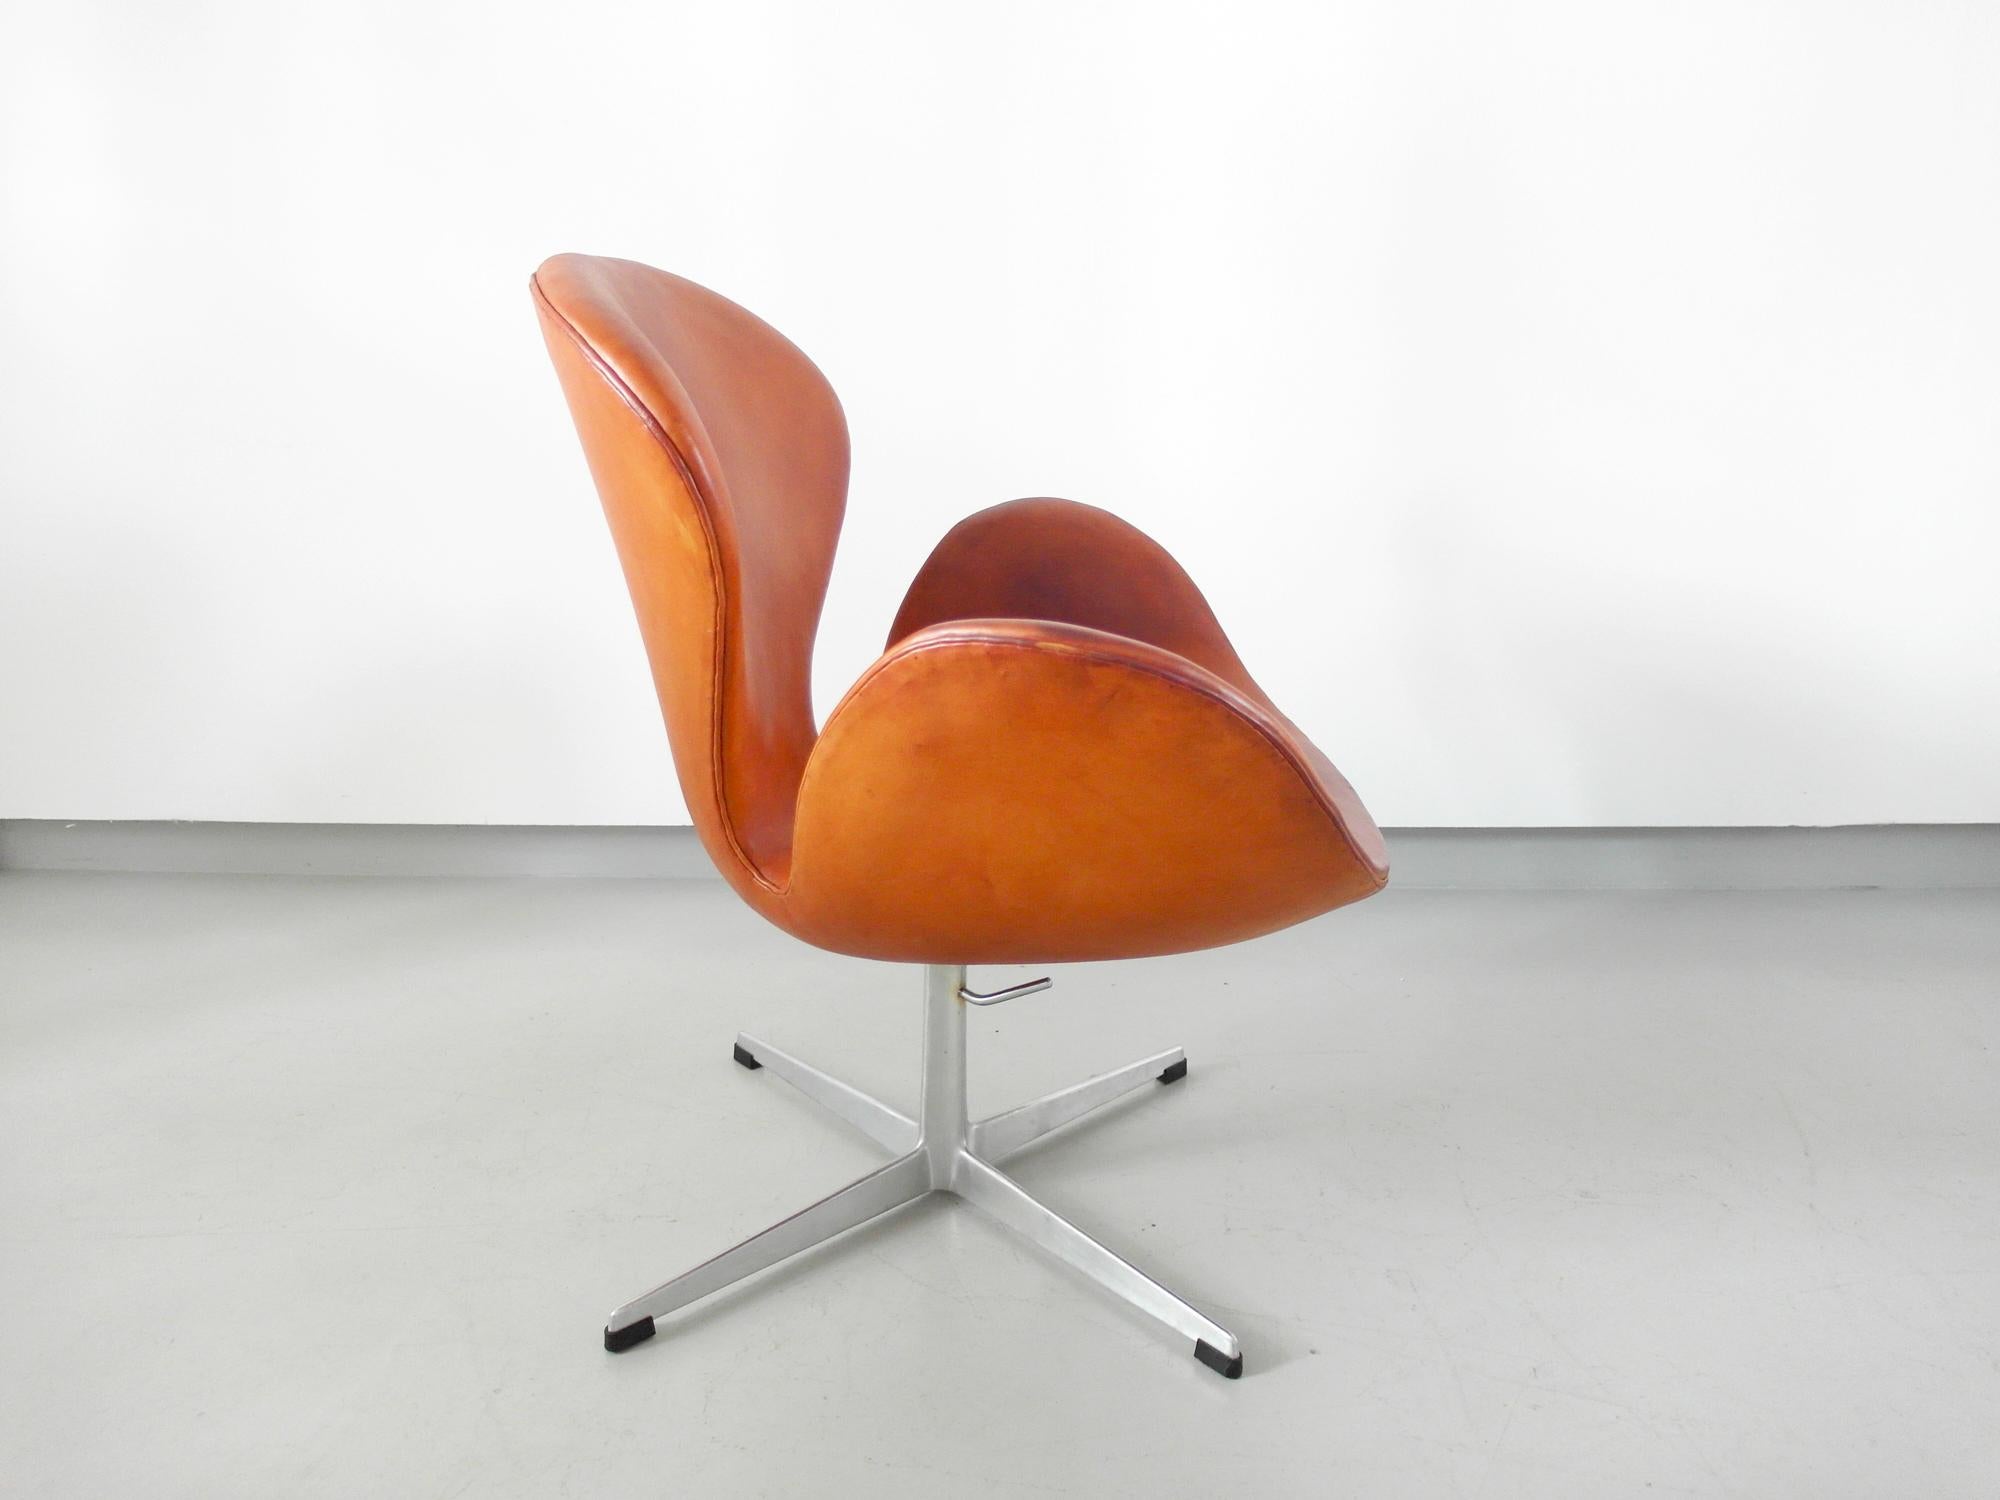 Gorgeous early edition Swan chair designed by Arne Jacobsen for Fritz Hansen, Denmark, 1964. This chair, Model 3320, better known as Swan is in very good fully original condition. The chair is still very sturdy, the foam inside has not dried over